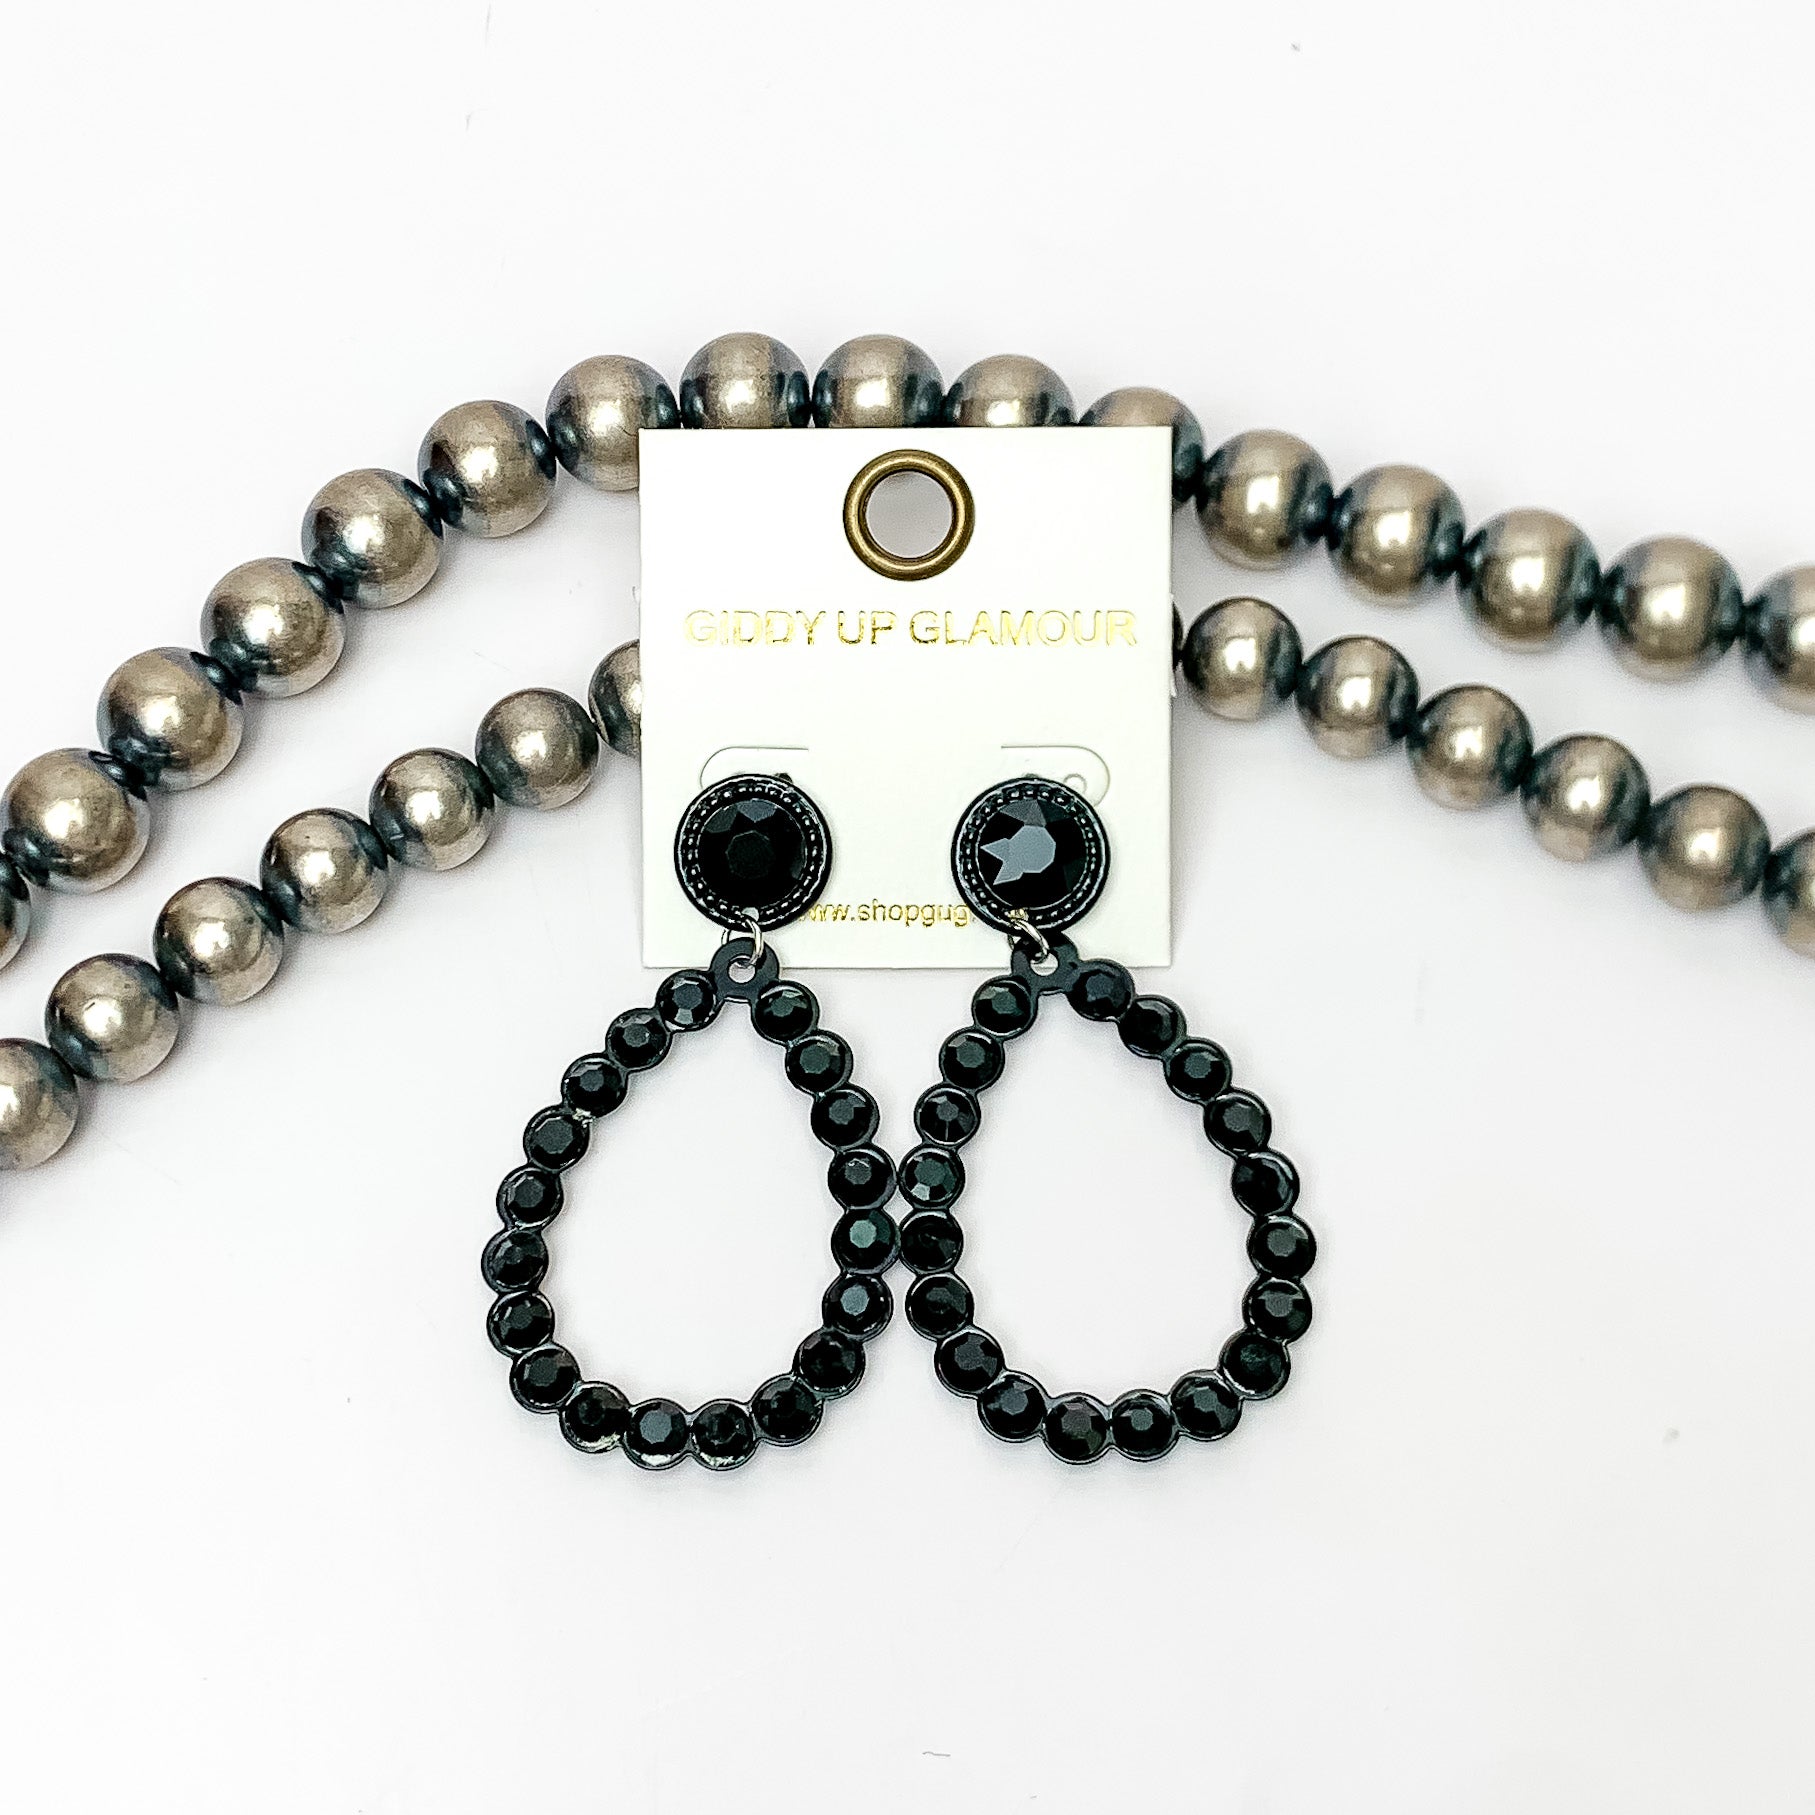 Glitzy Girl Black Crystal Teardrop Earrings in Black. Pictured on a white background with Navajo pearls behind the earrings.